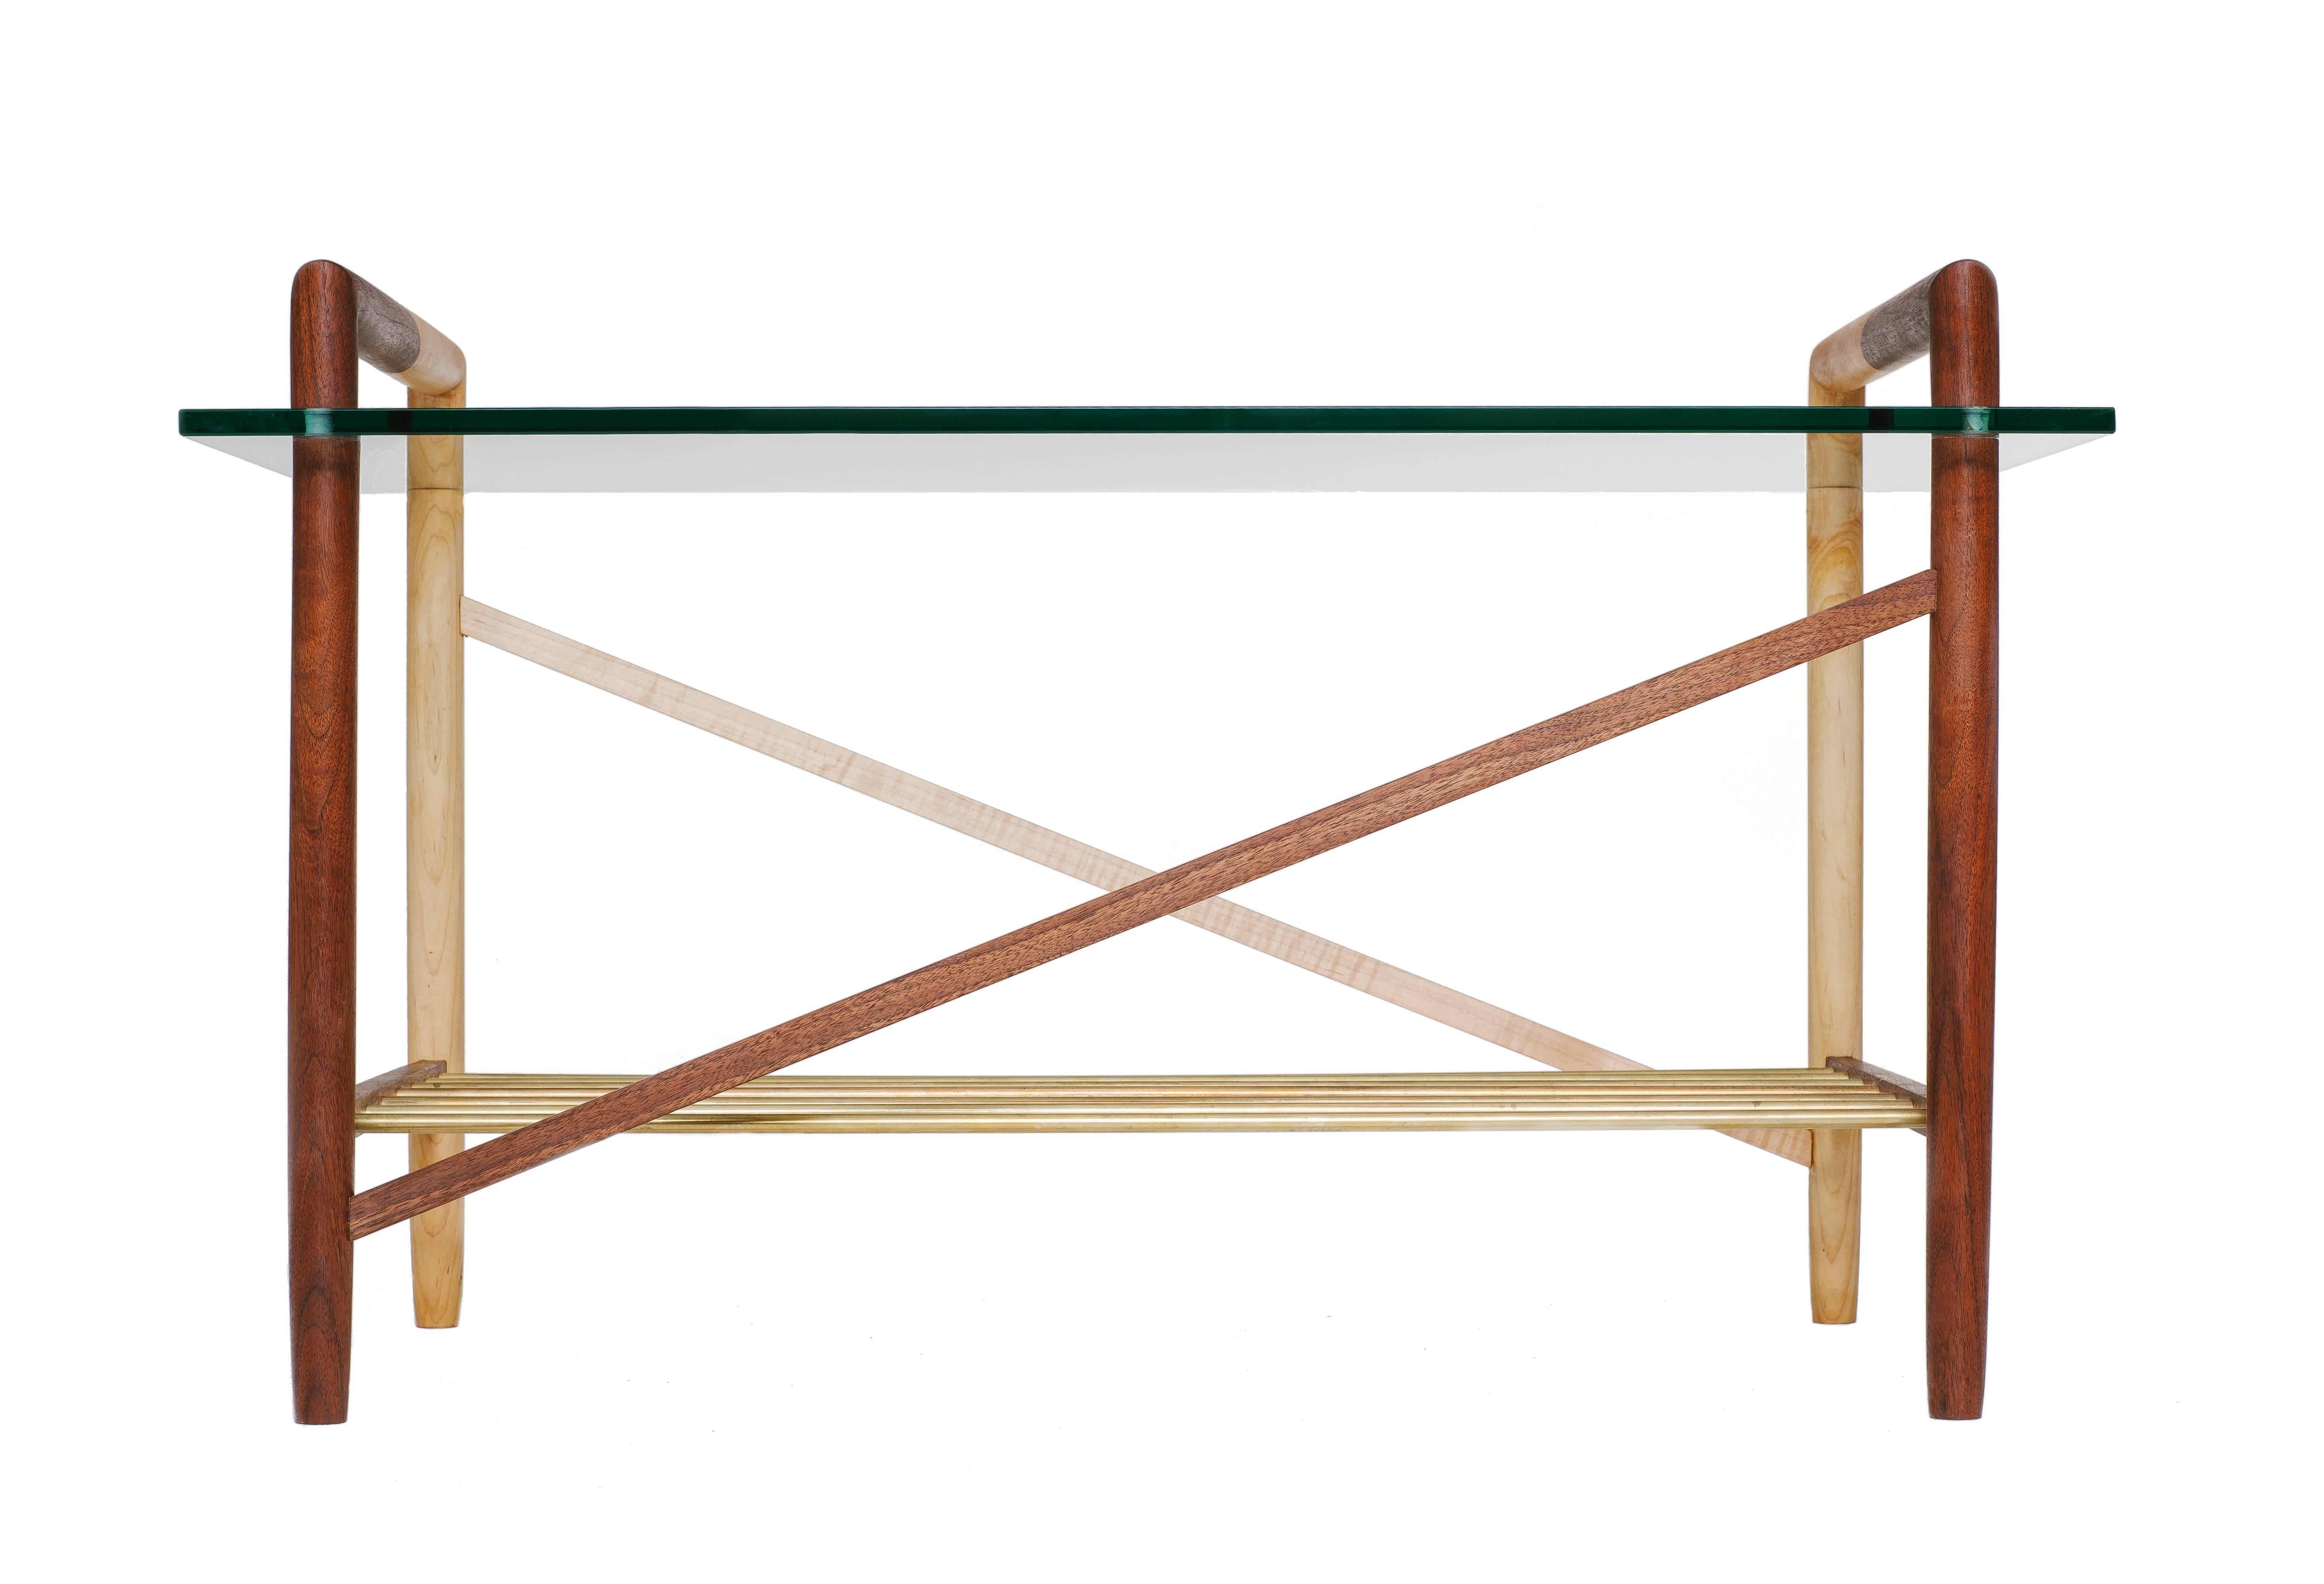 Switchback intersecting wood species. Fine metal shelving rods and polished glass top. Made in Los Angeles, California.

Shown in walnut, maple and brass with clear tempered glass. 

Please inquire for custom wood, metal and glass options.